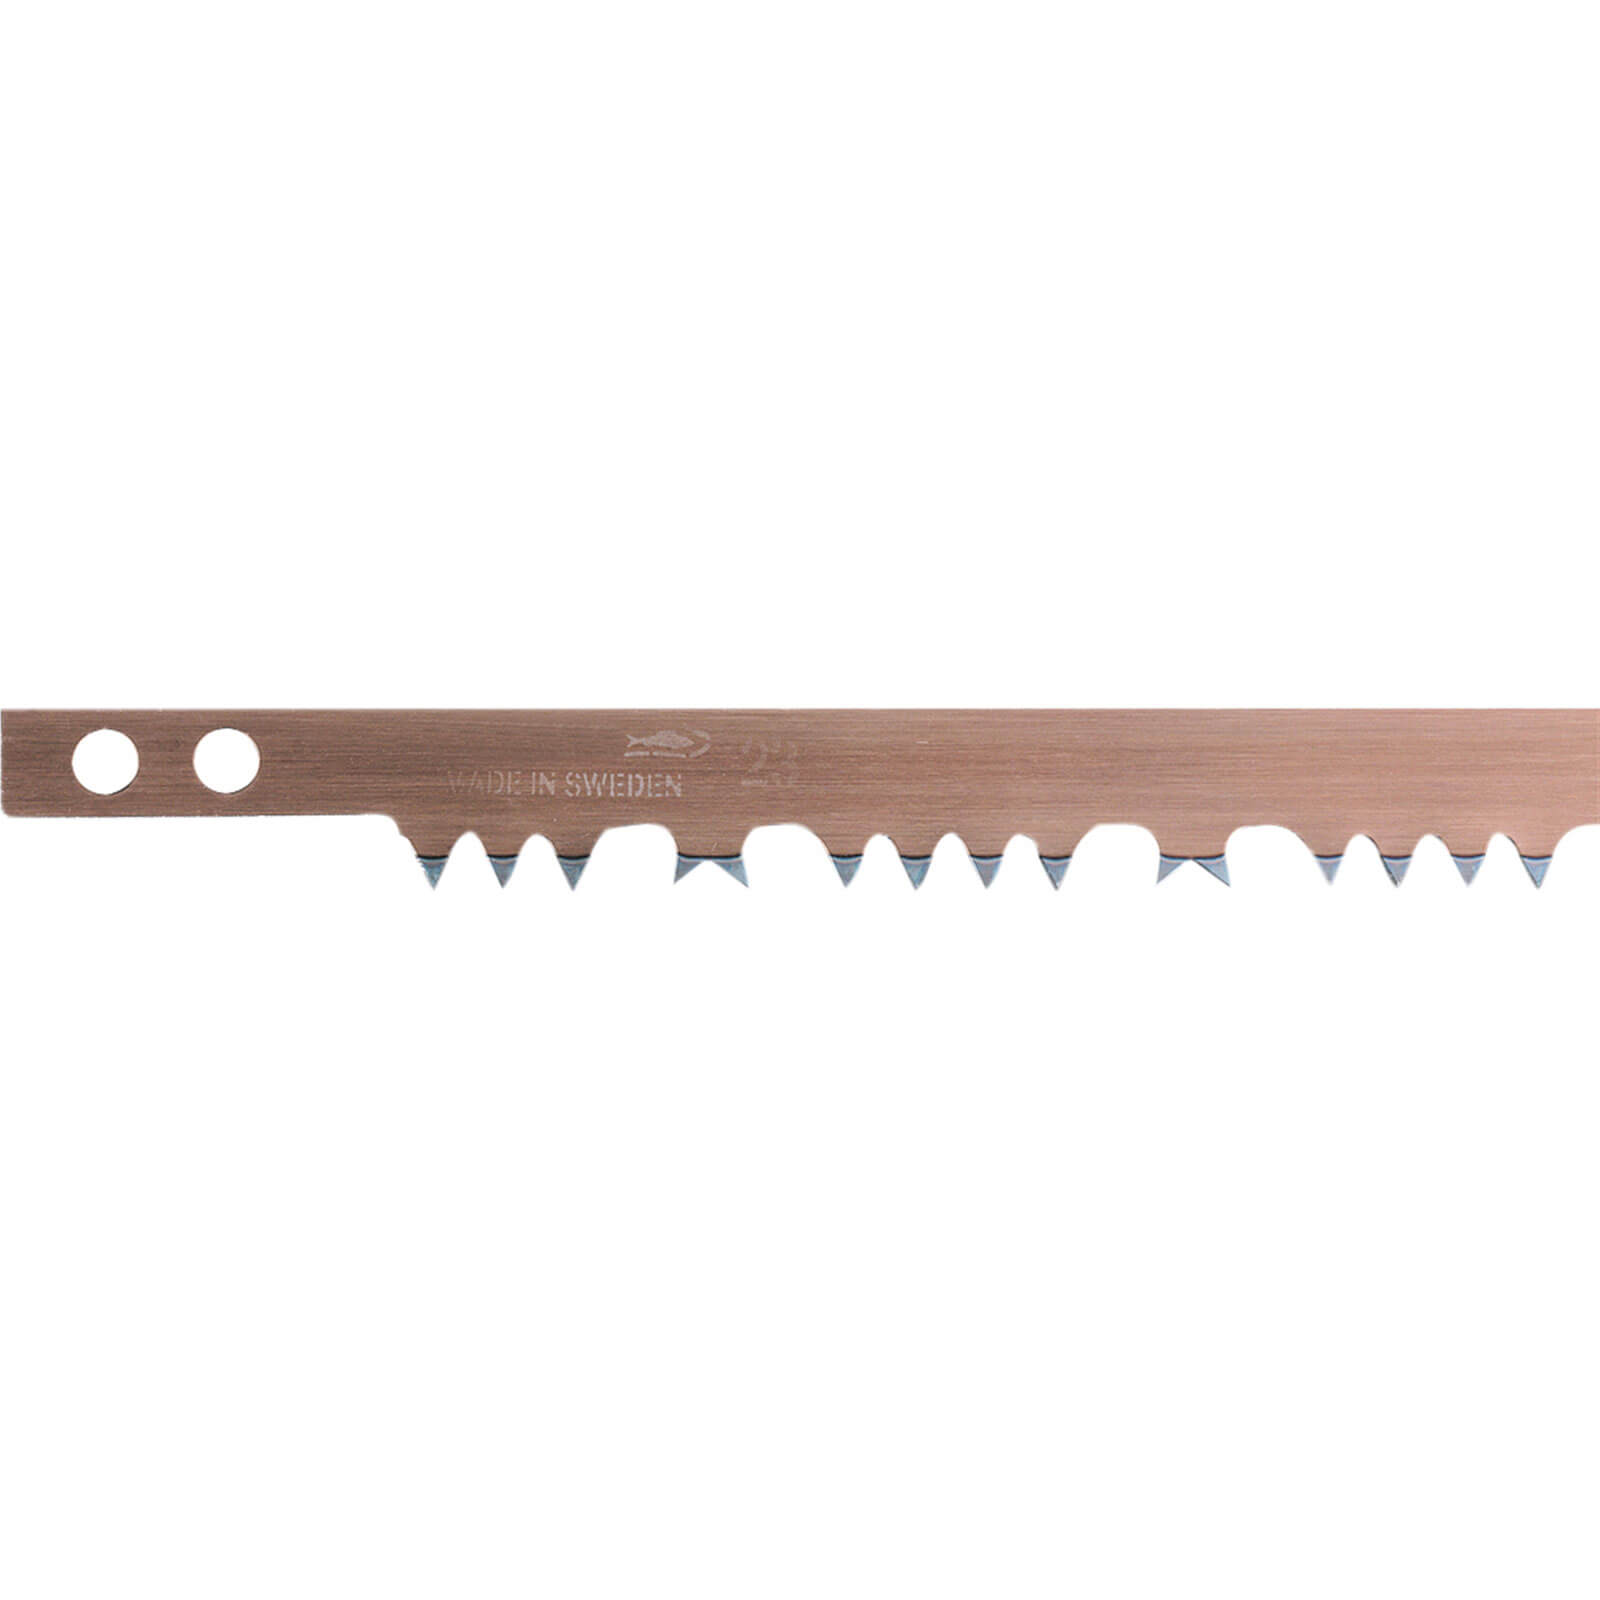 Bahco Raker Tooth Hard Point Bowsaw Blade 24" / 607mm For Green Wood